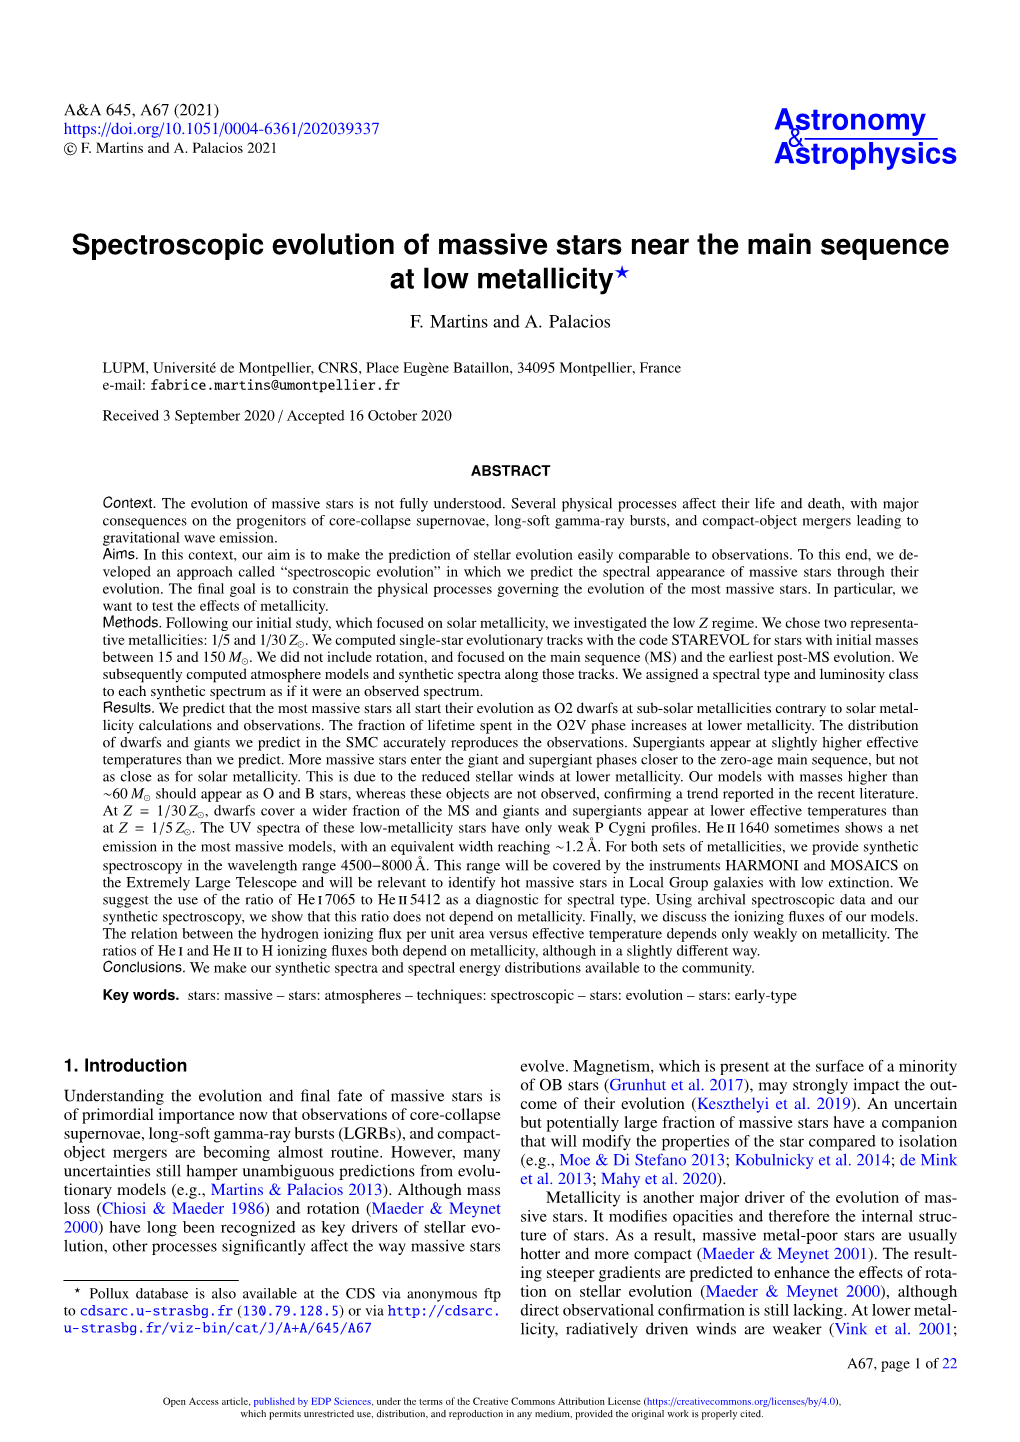 Spectroscopic Evolution of Massive Stars Near the Main Sequence at Low Metallicity? F